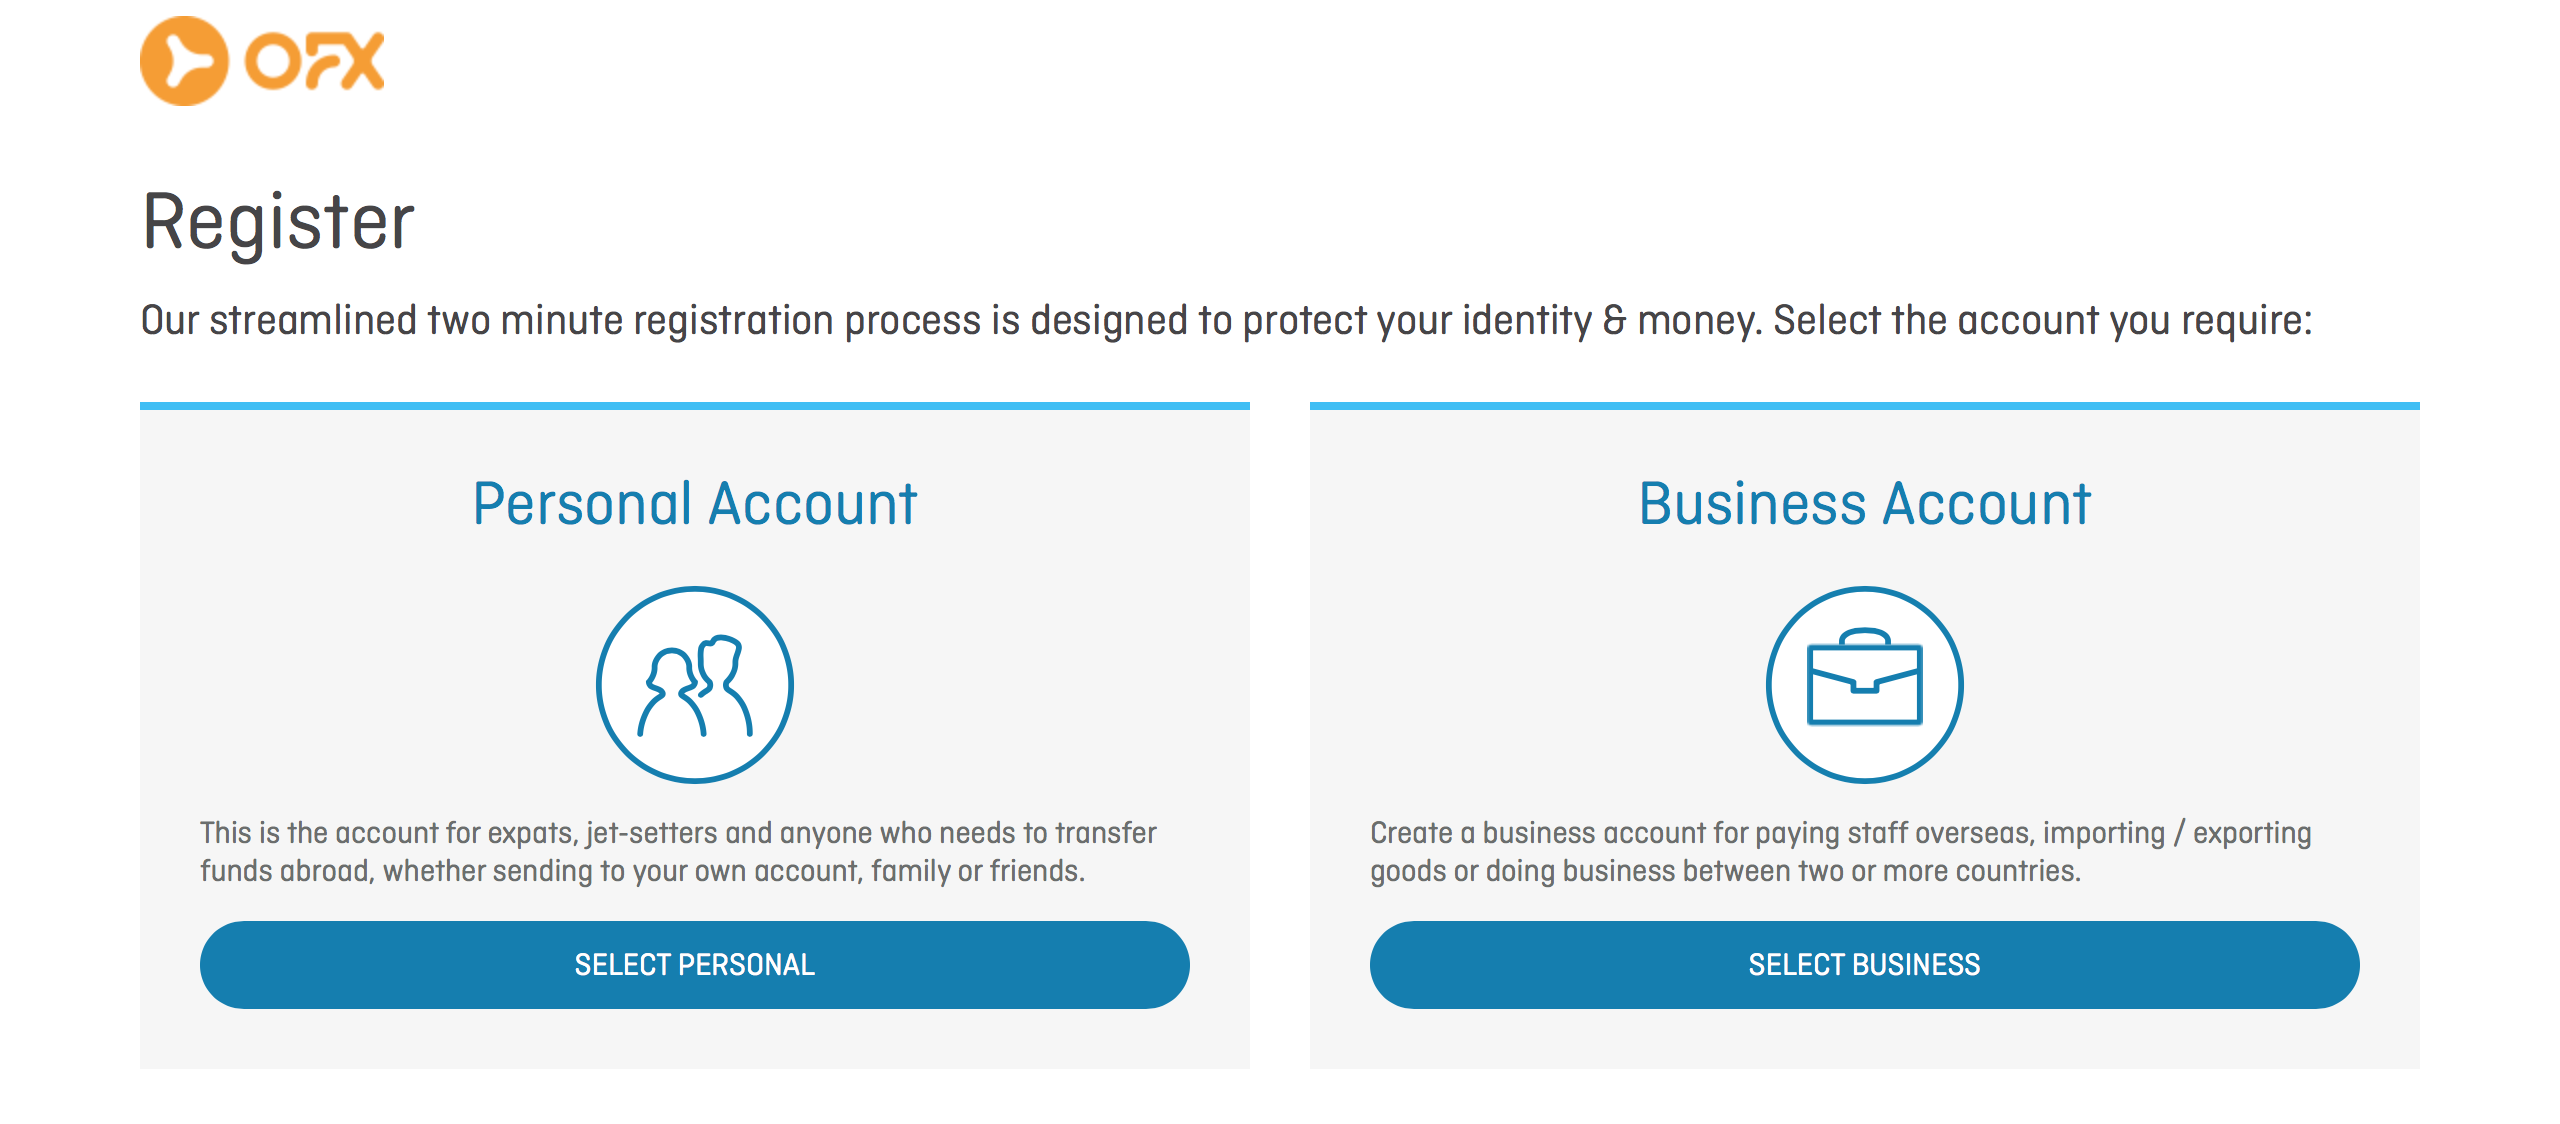 Register with OFX through personal account business account